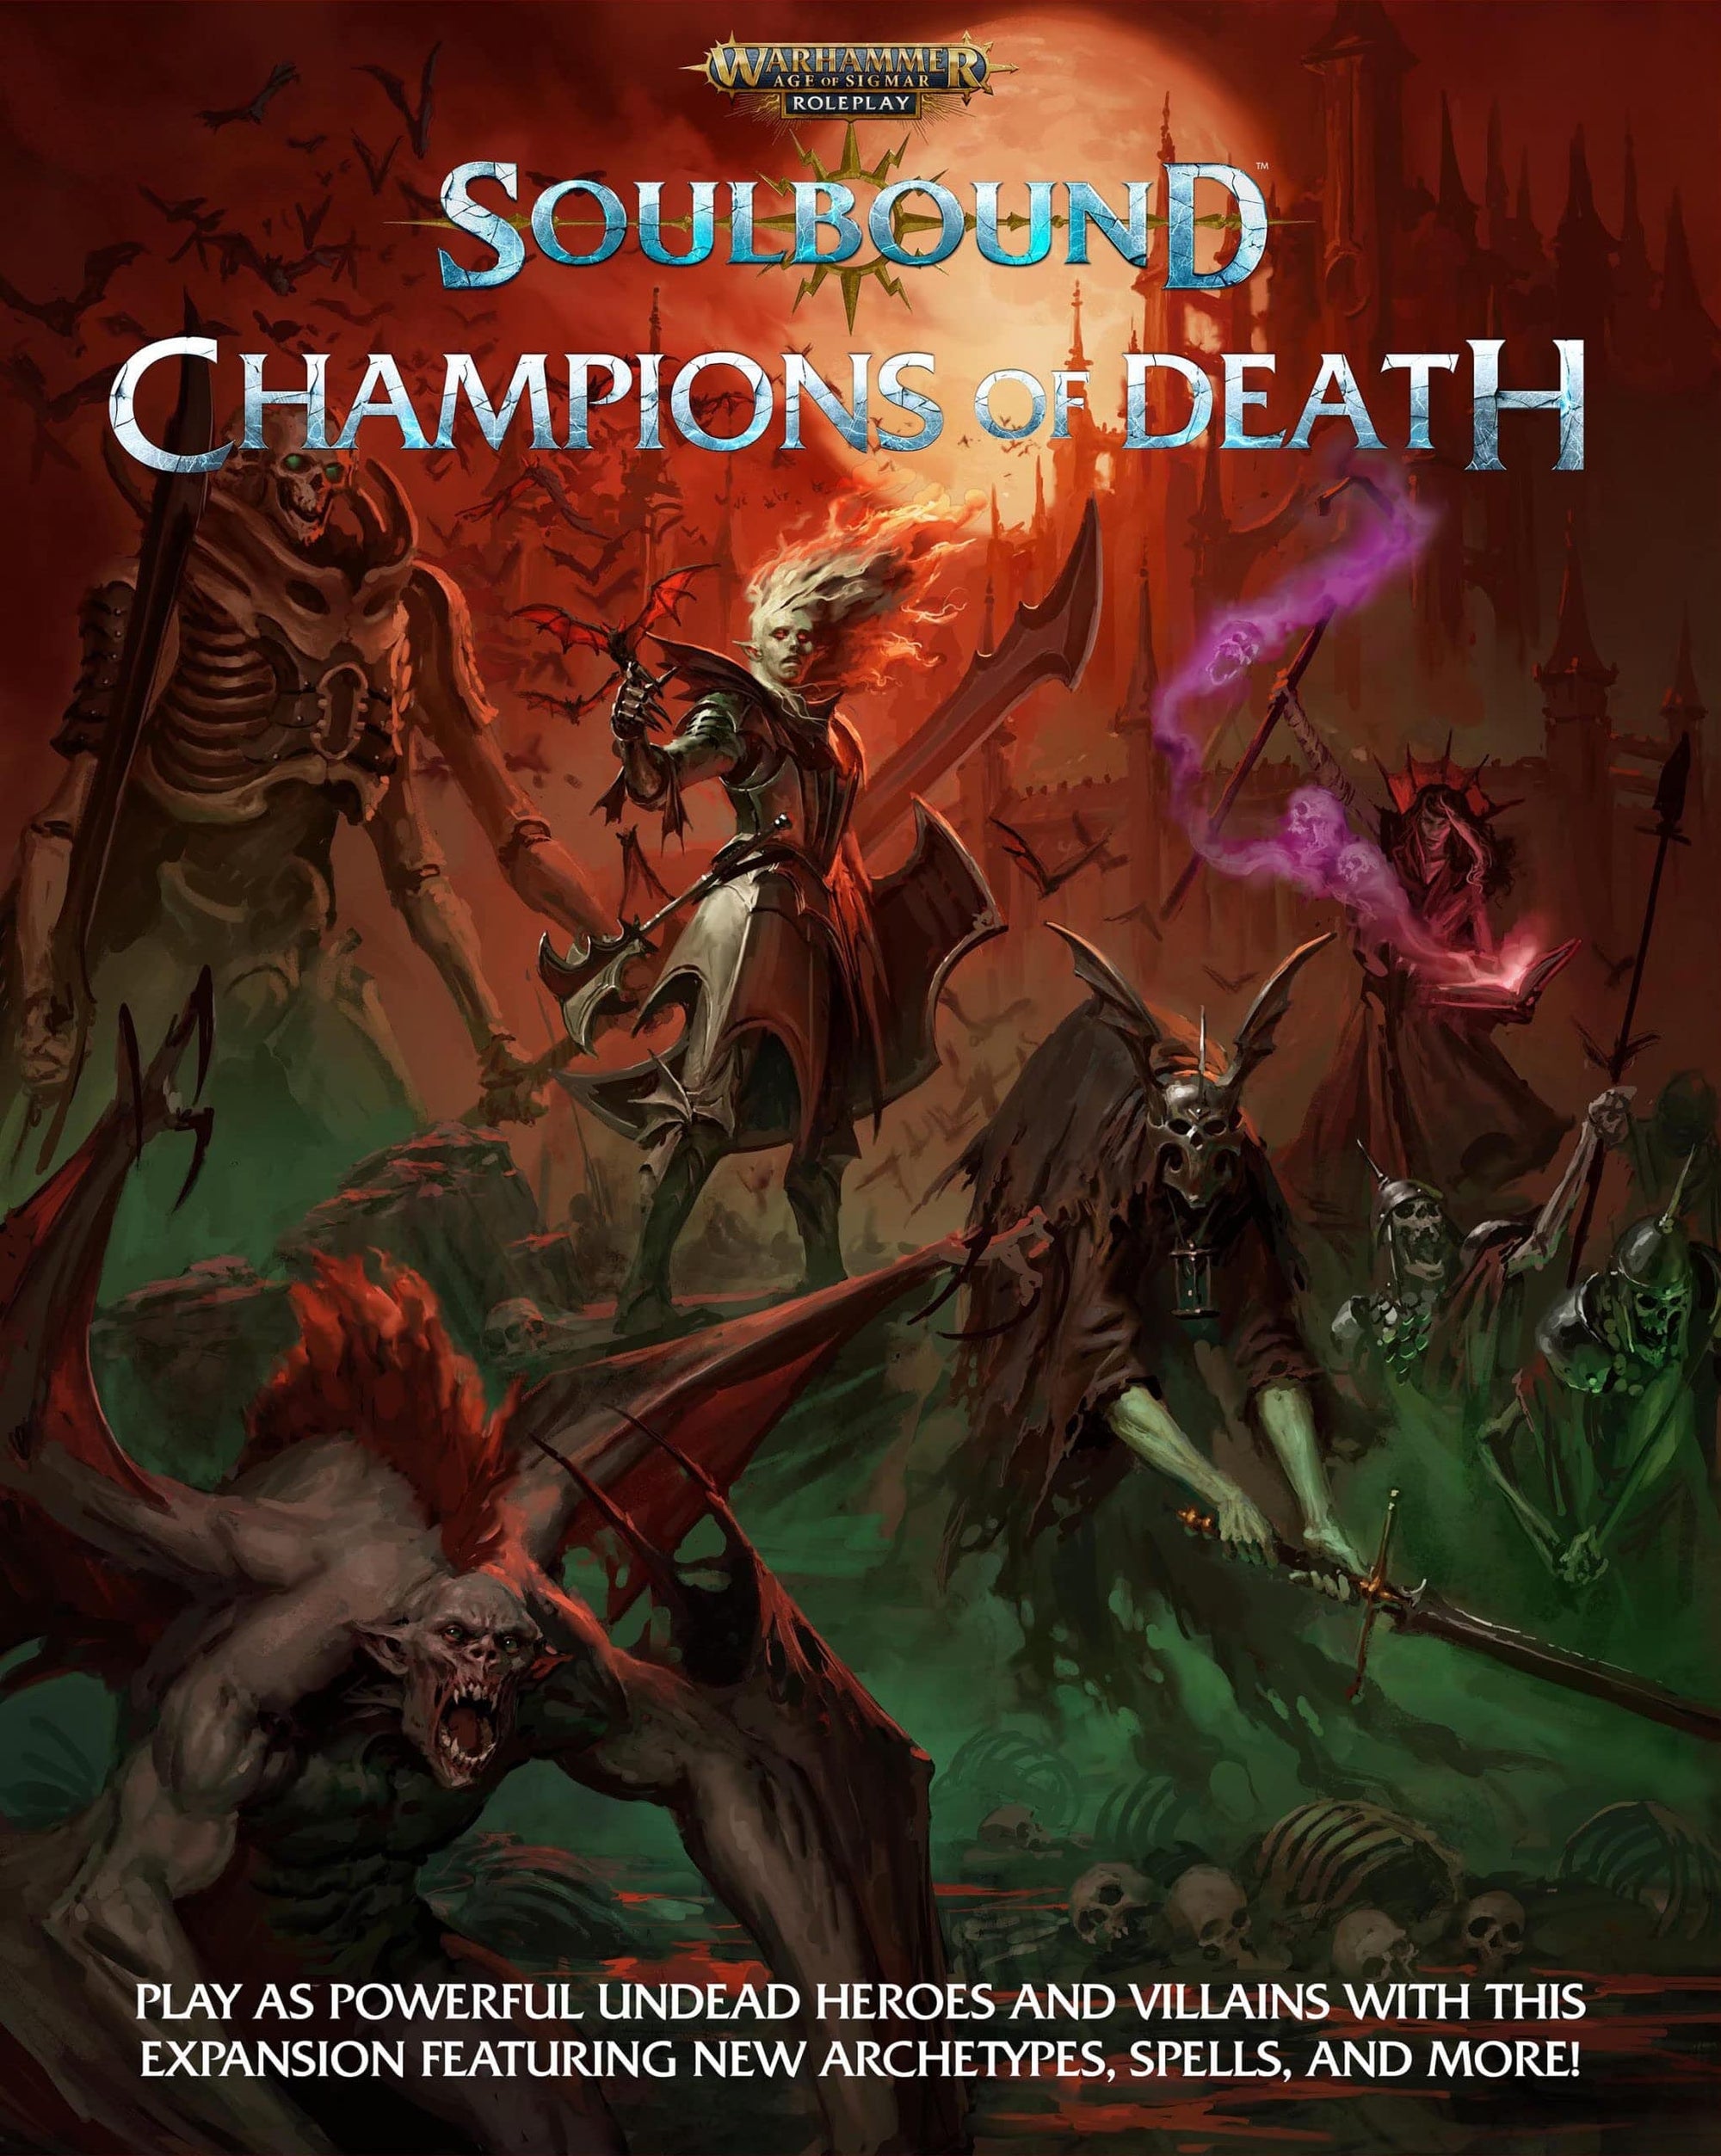 Cubicle 7 Role Playing Games Cubicle 7 Warhammer Age of Sigmar - Soulbound RPG: Champions of Death